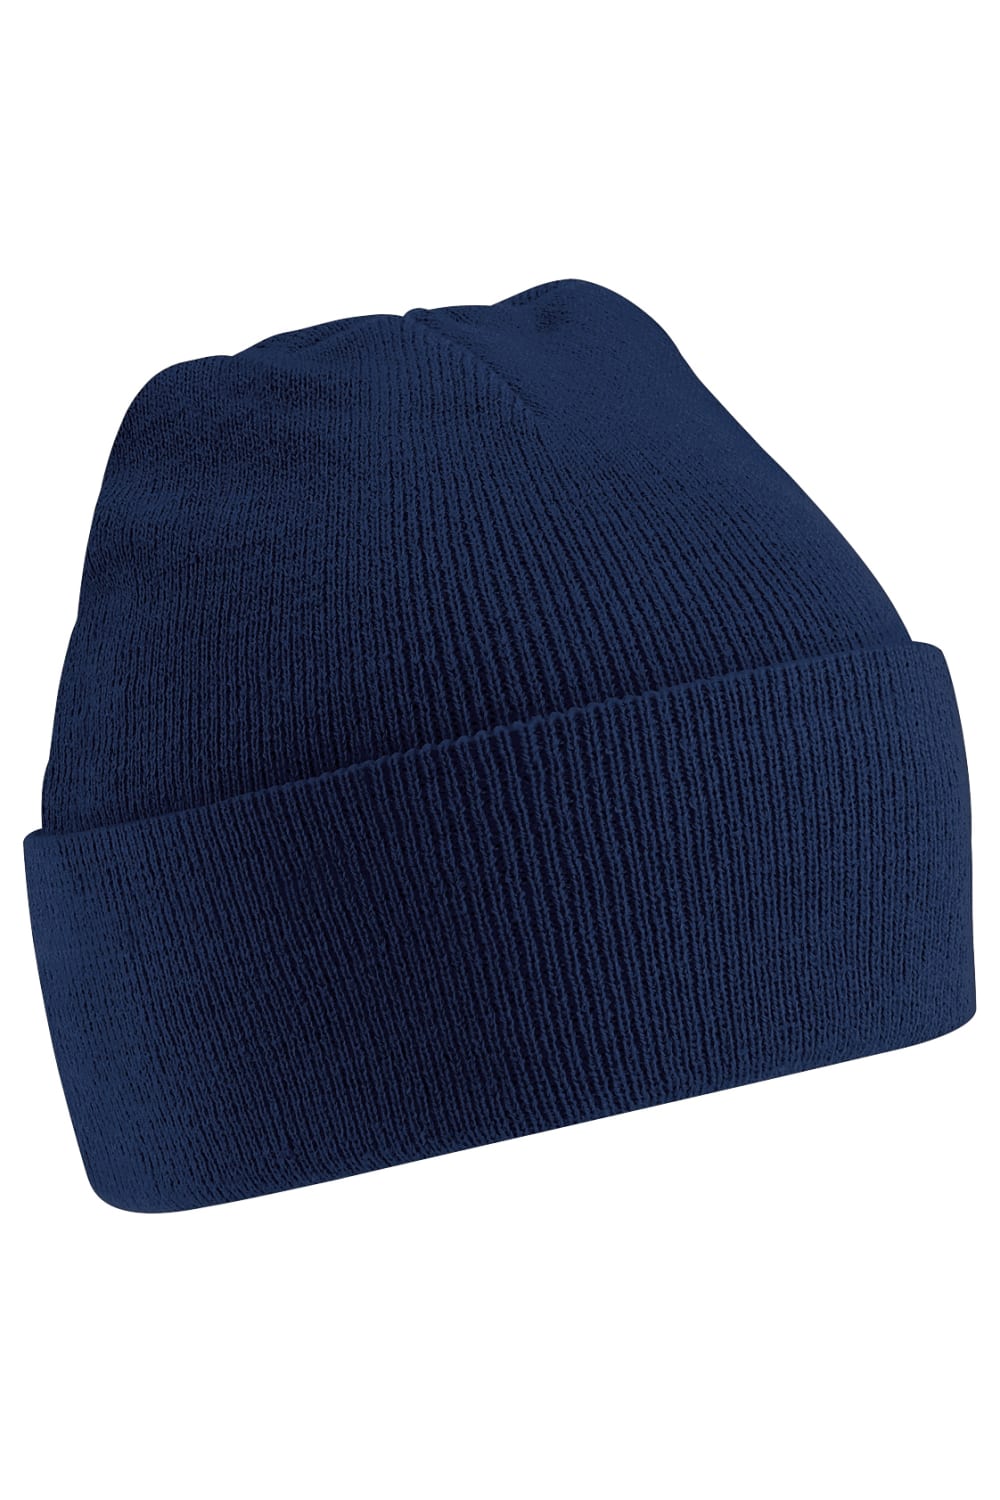 Beechfield Big Boys Junior Kids Knitted Soft Touch Winter Hat (French Navy)